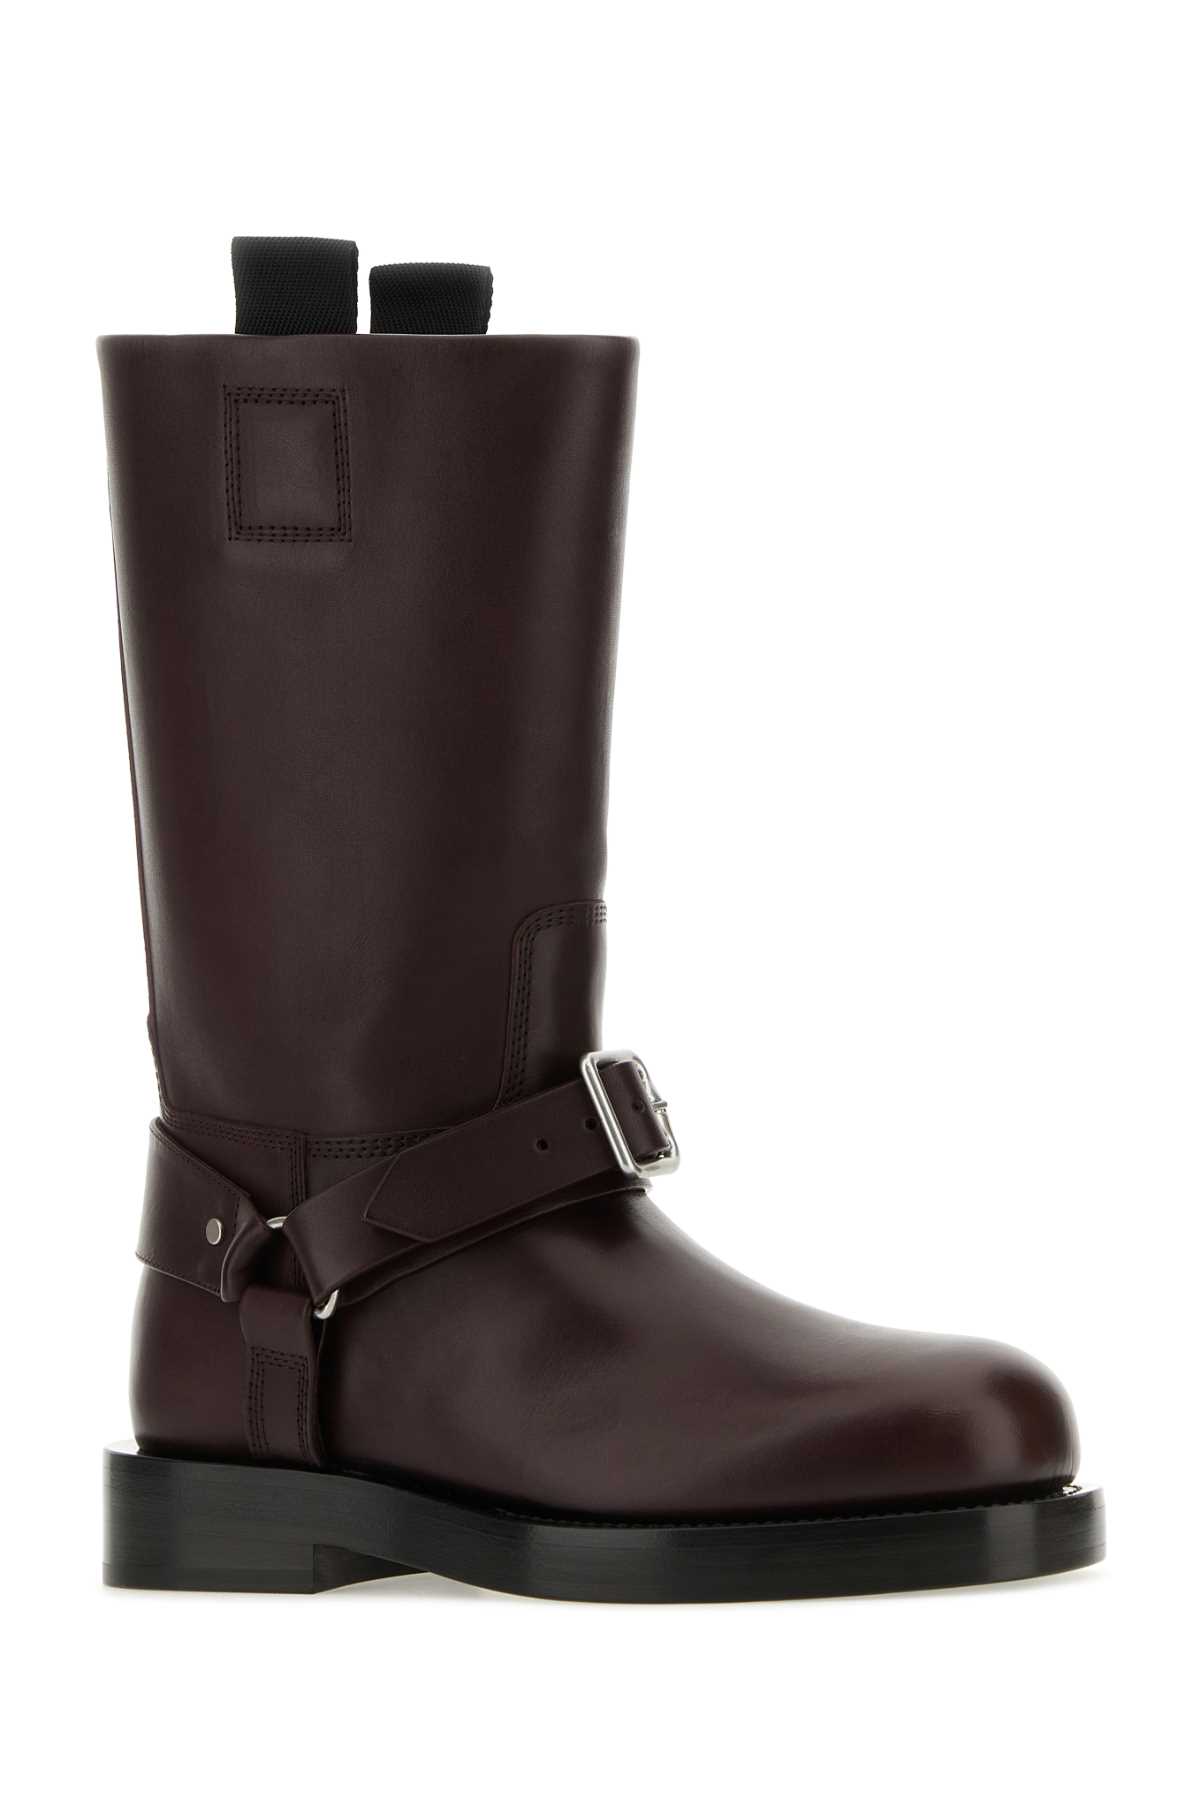 Burberry Aubergine Leather Saddle Ankle Boots